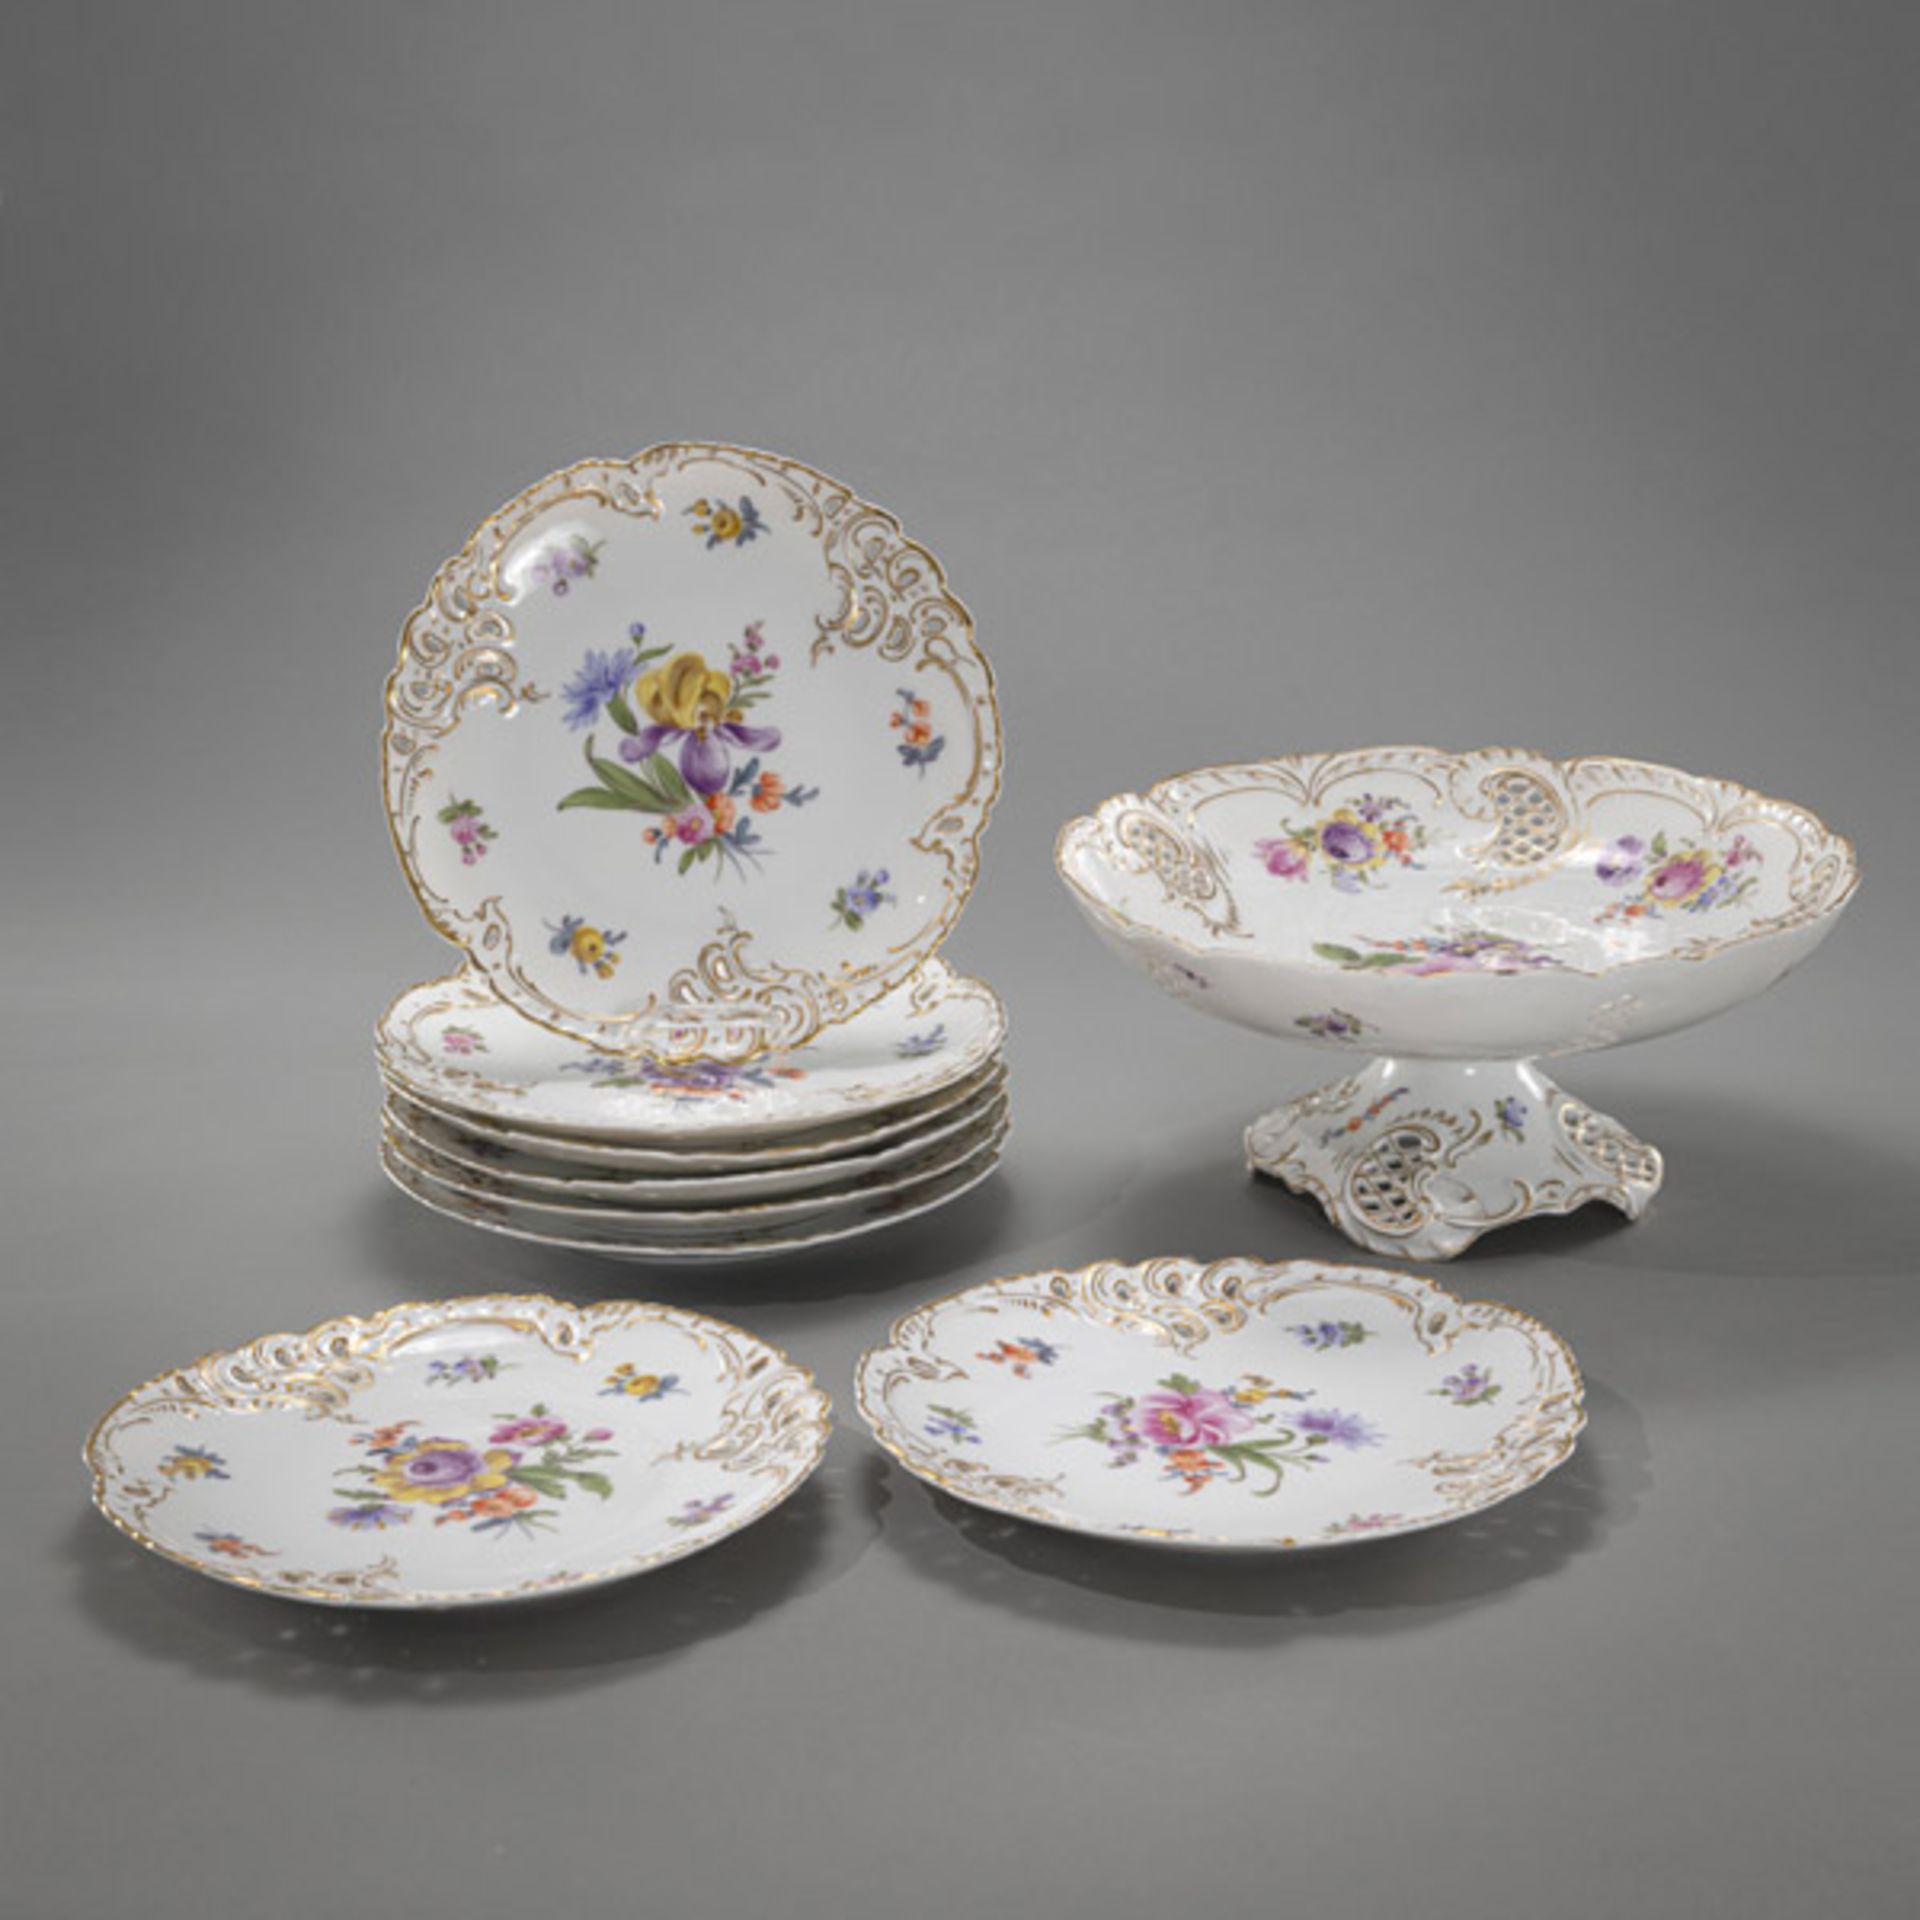 A NYMPHENBURG FOOTED DISH AND 8 PLATES